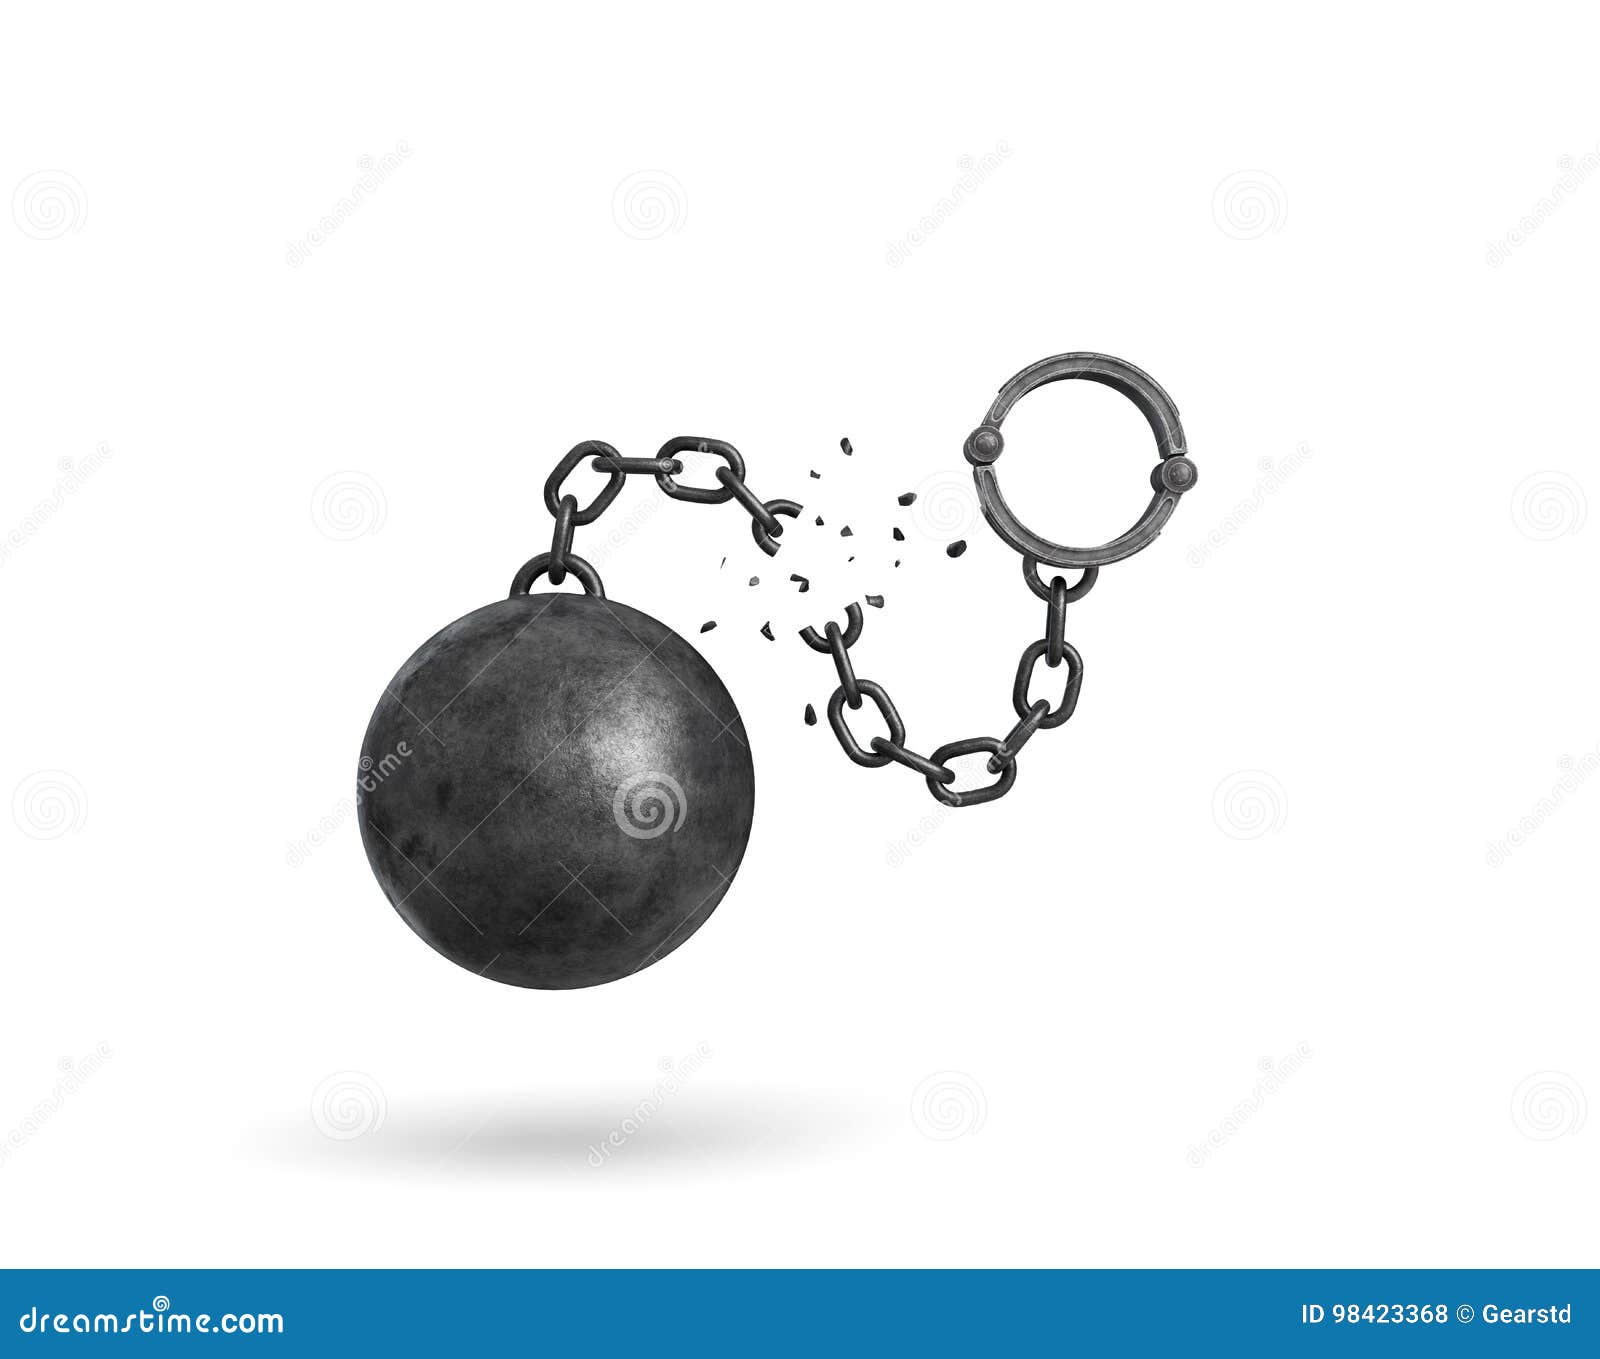 3d Rendering Of An Isolated Ball And Chain Broken In Half With A ...